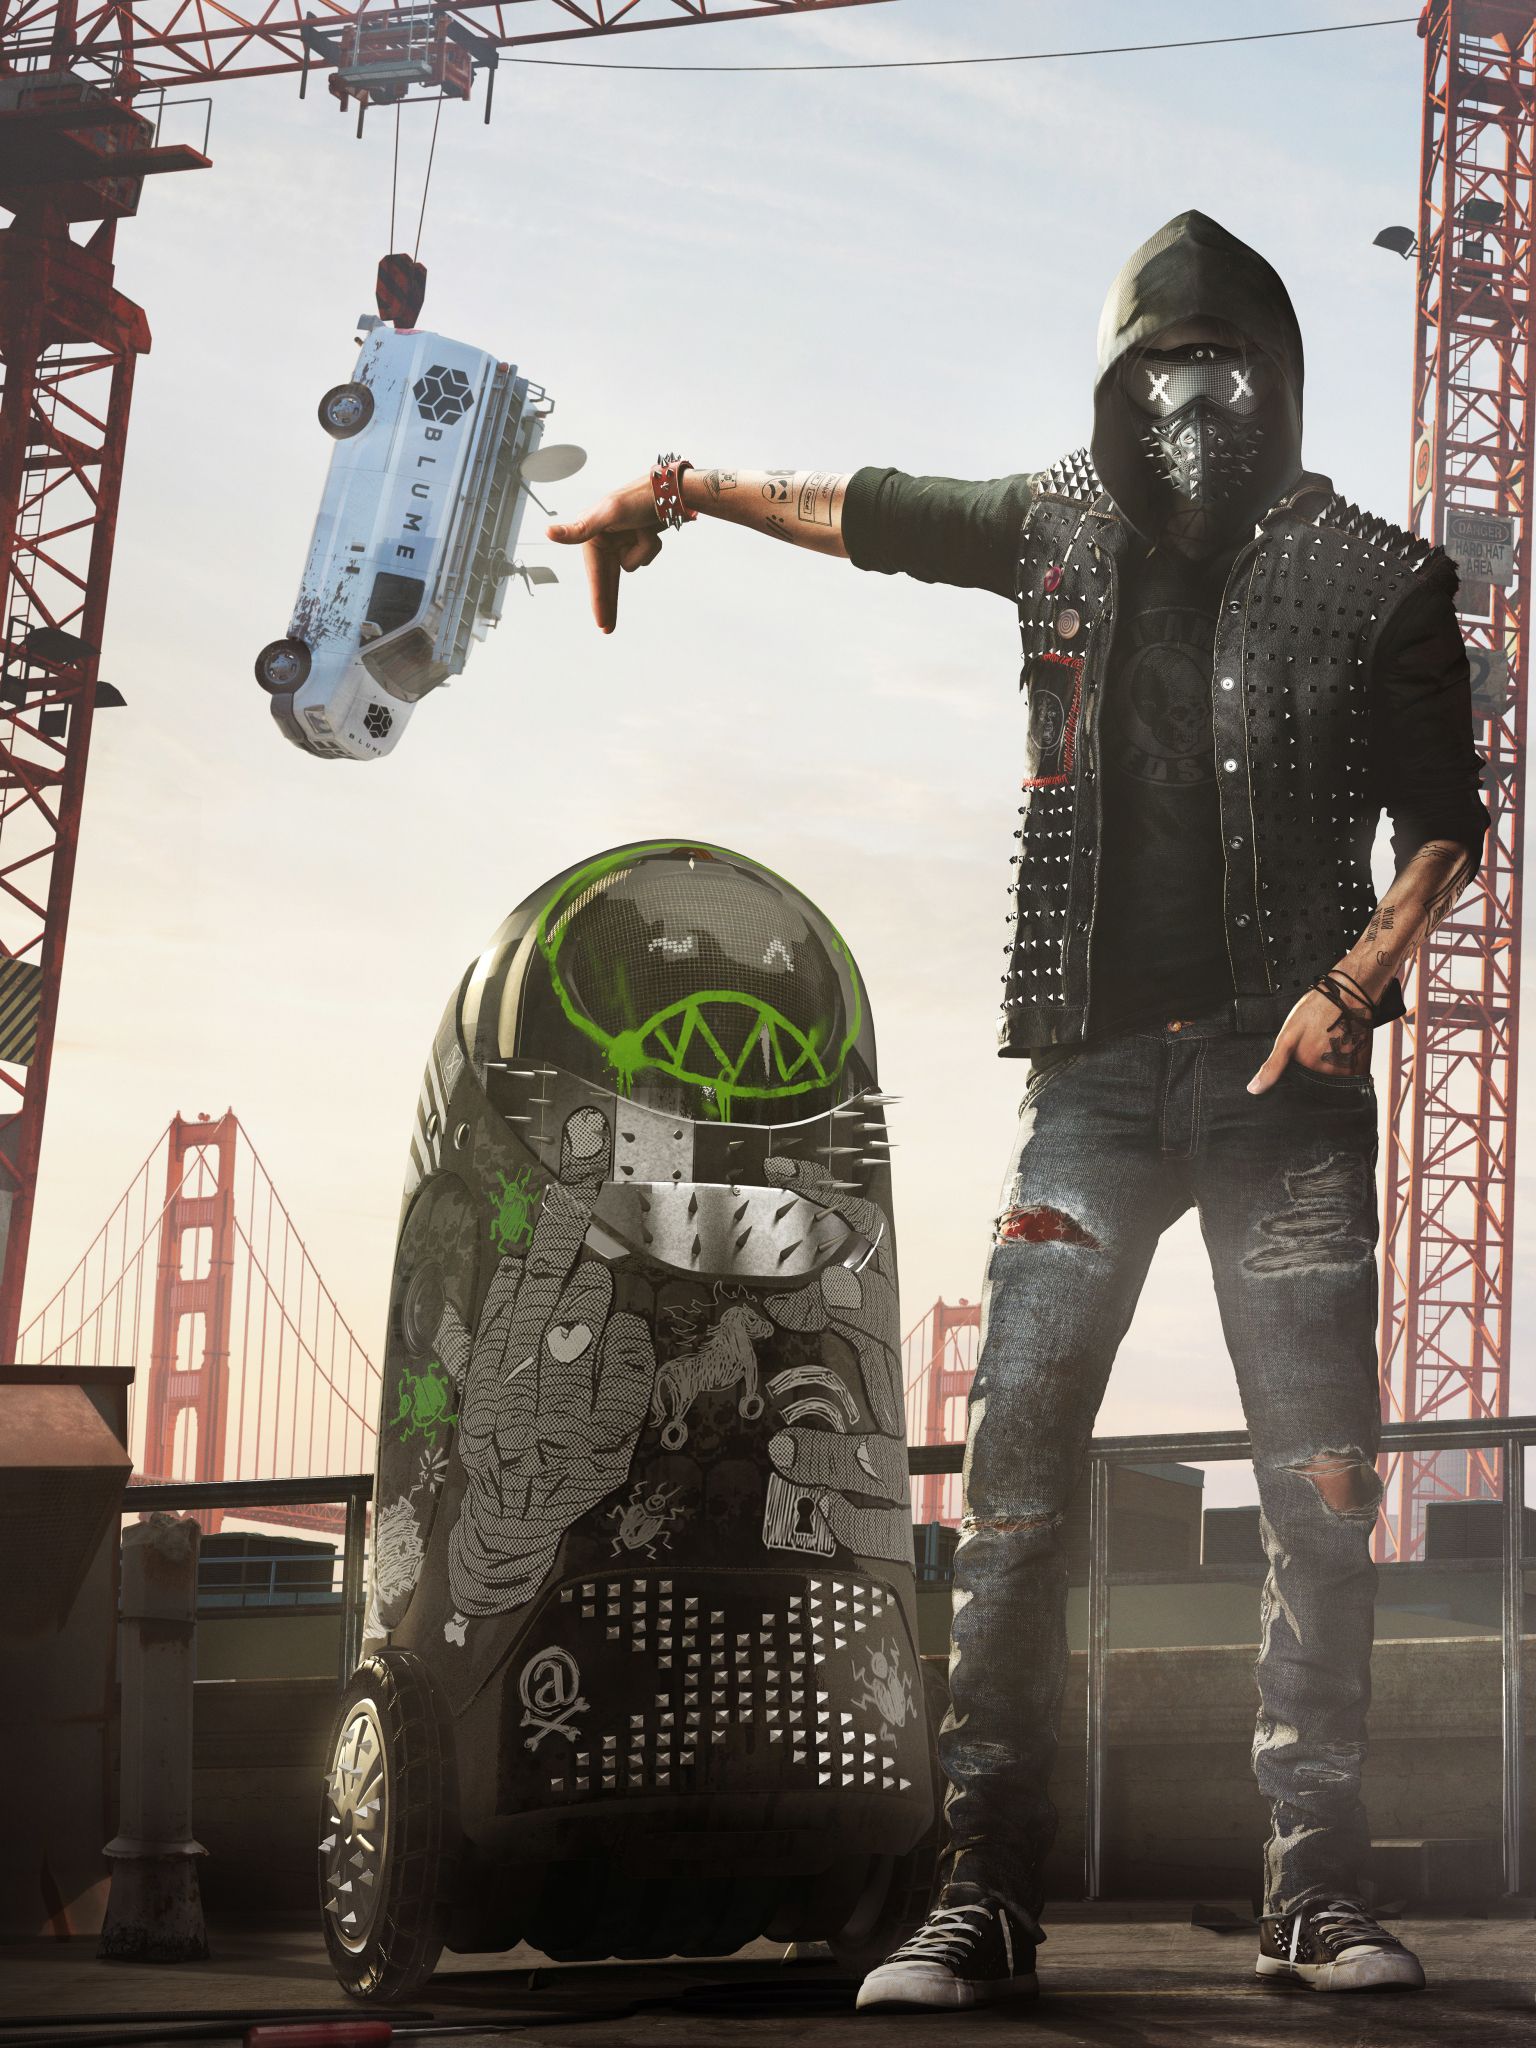 Wrench Watch Dogs 2